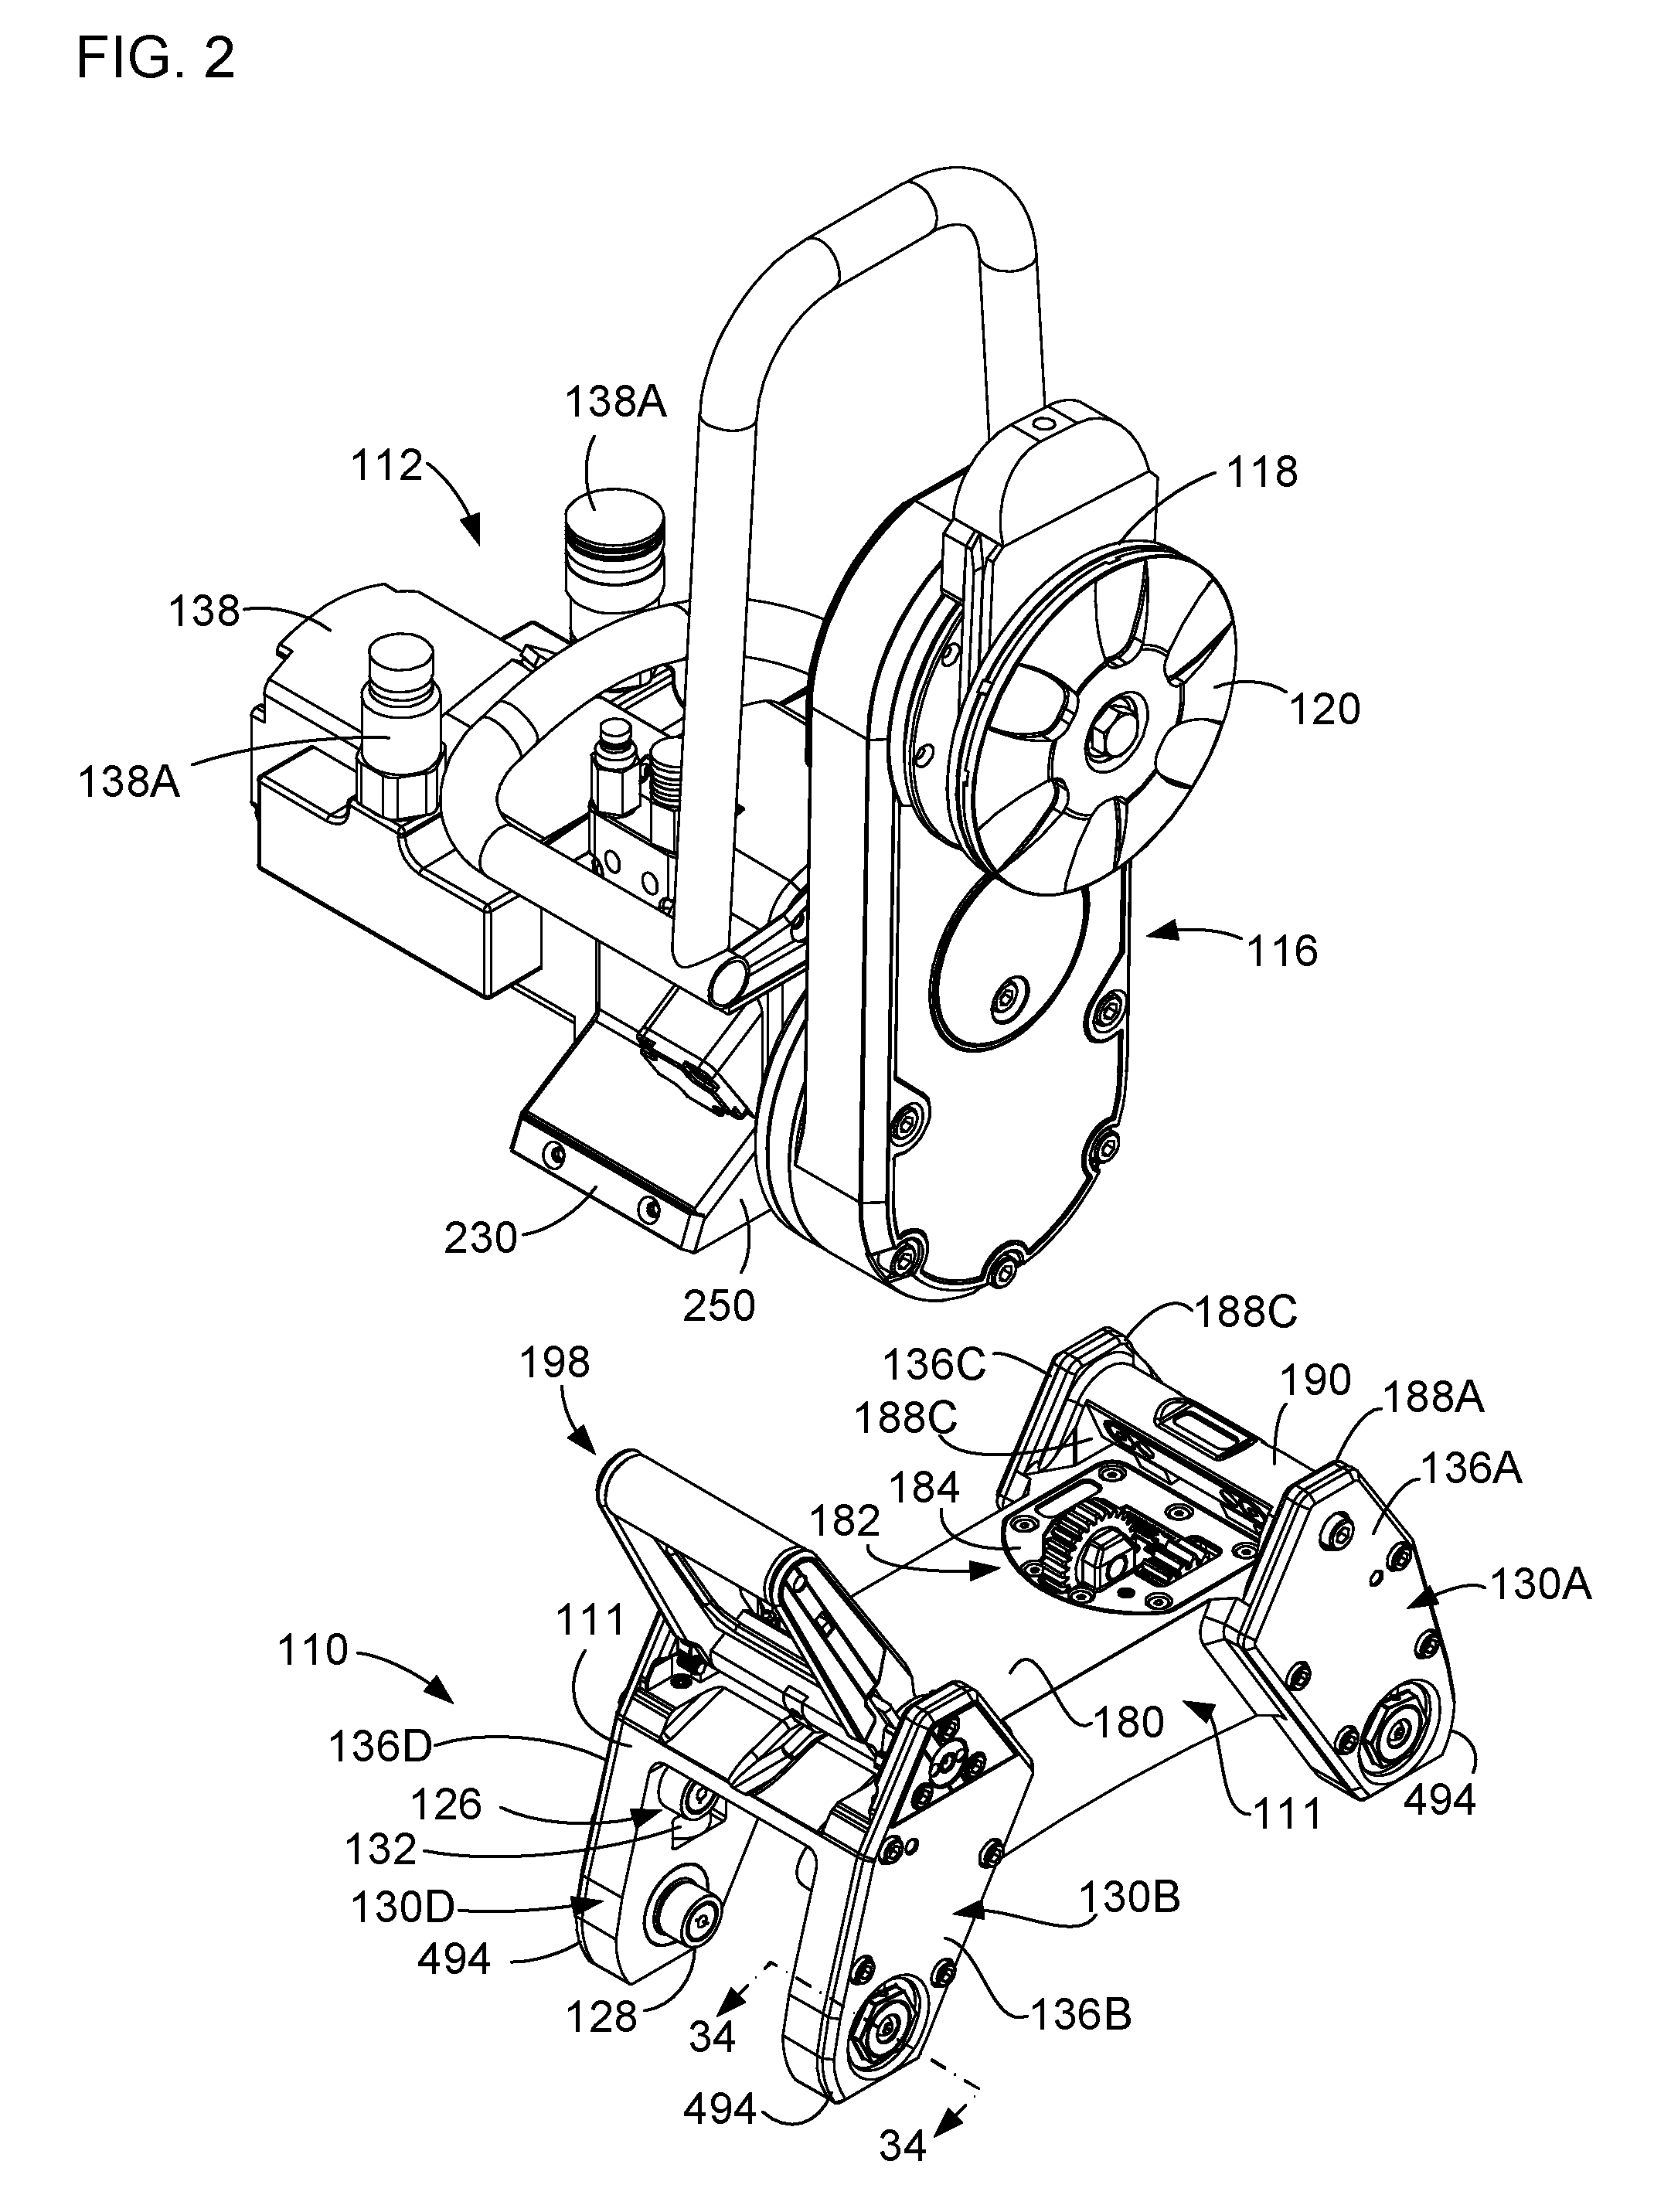 Methods and apparatus for movable machining tools, including for wall saws